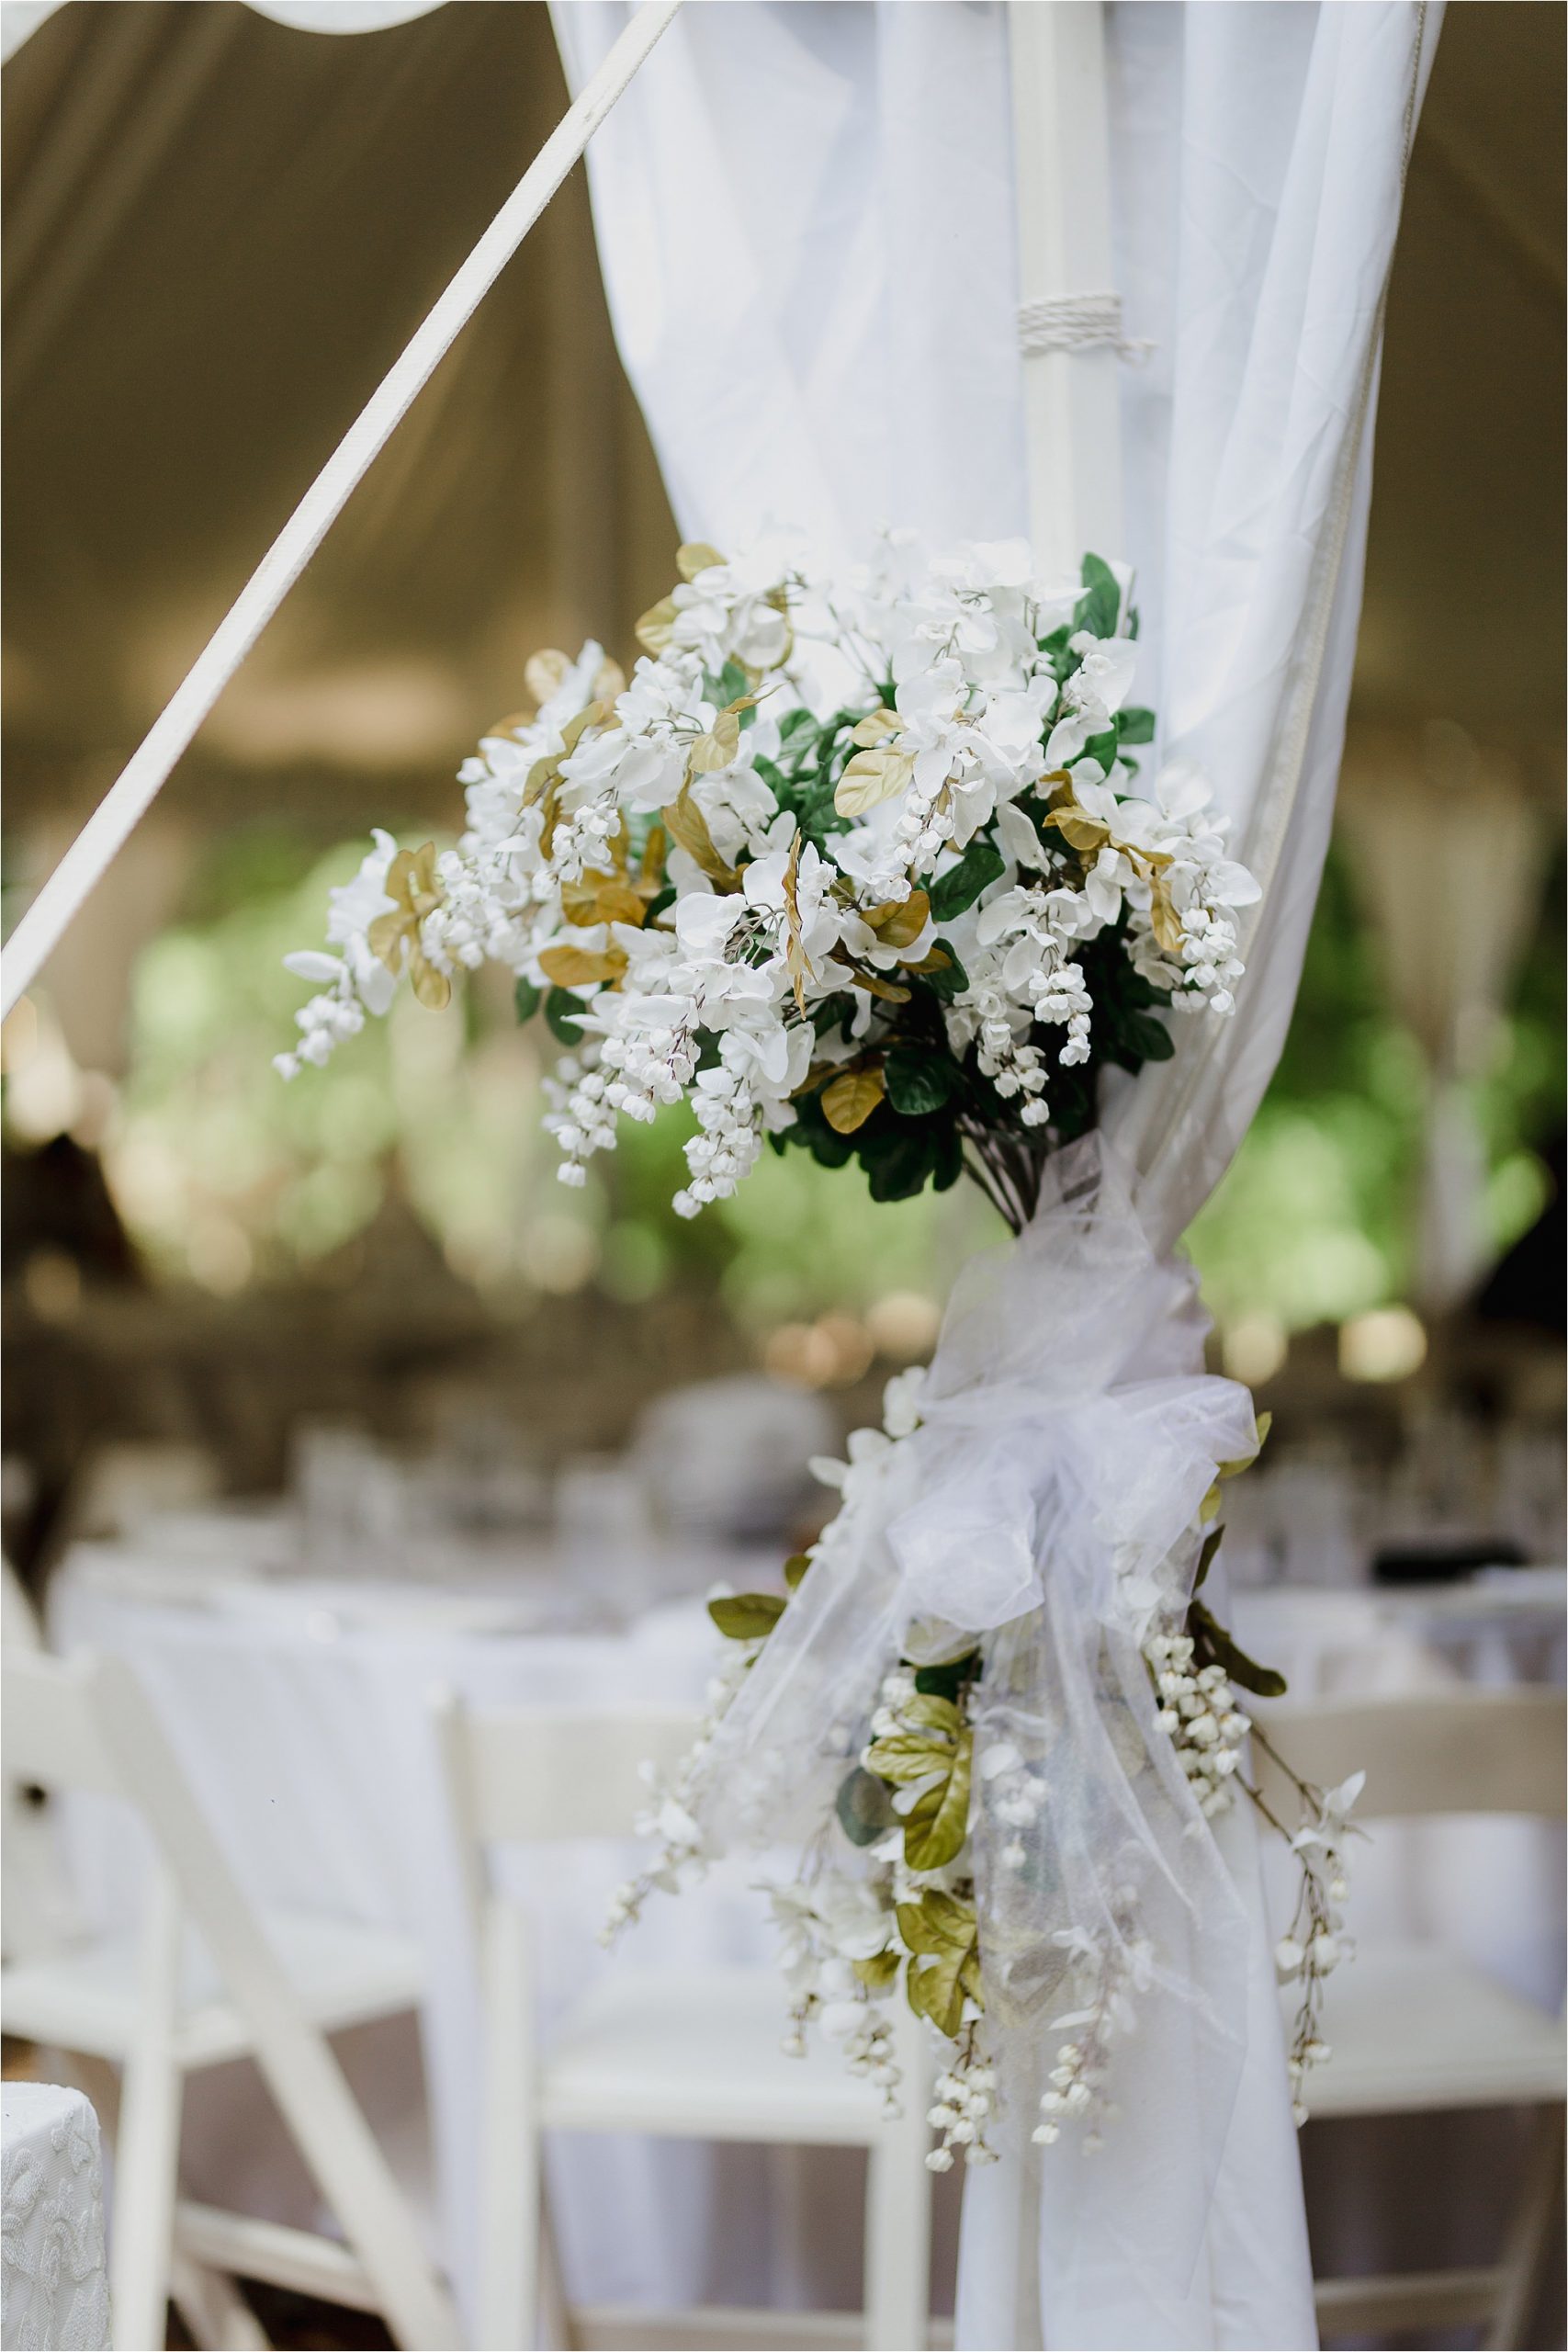 Sonia V Photography, The Clearing reception wedding venue, outdoor tent dinner decor